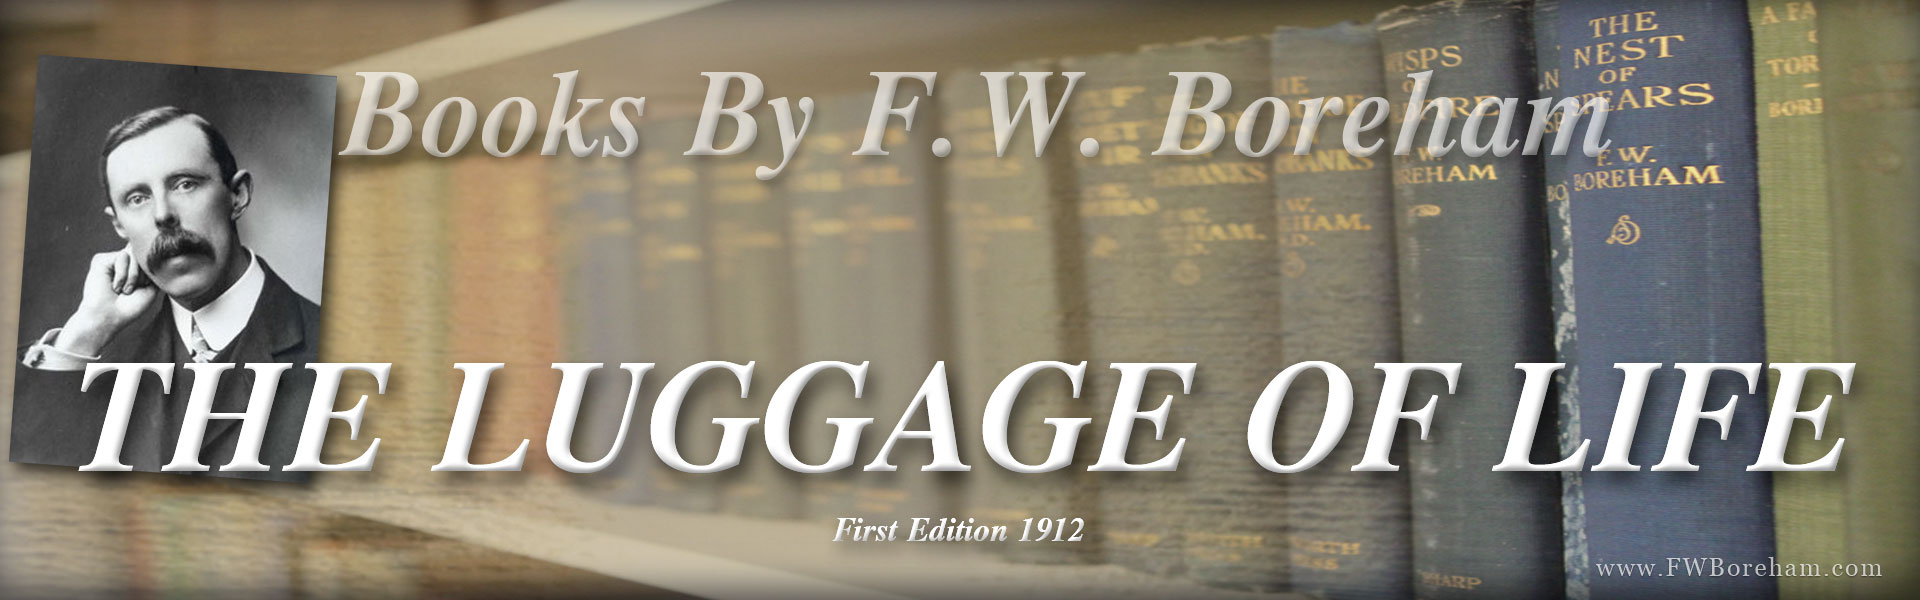 The Luggage of Life, by Dr. F.W. Boreham